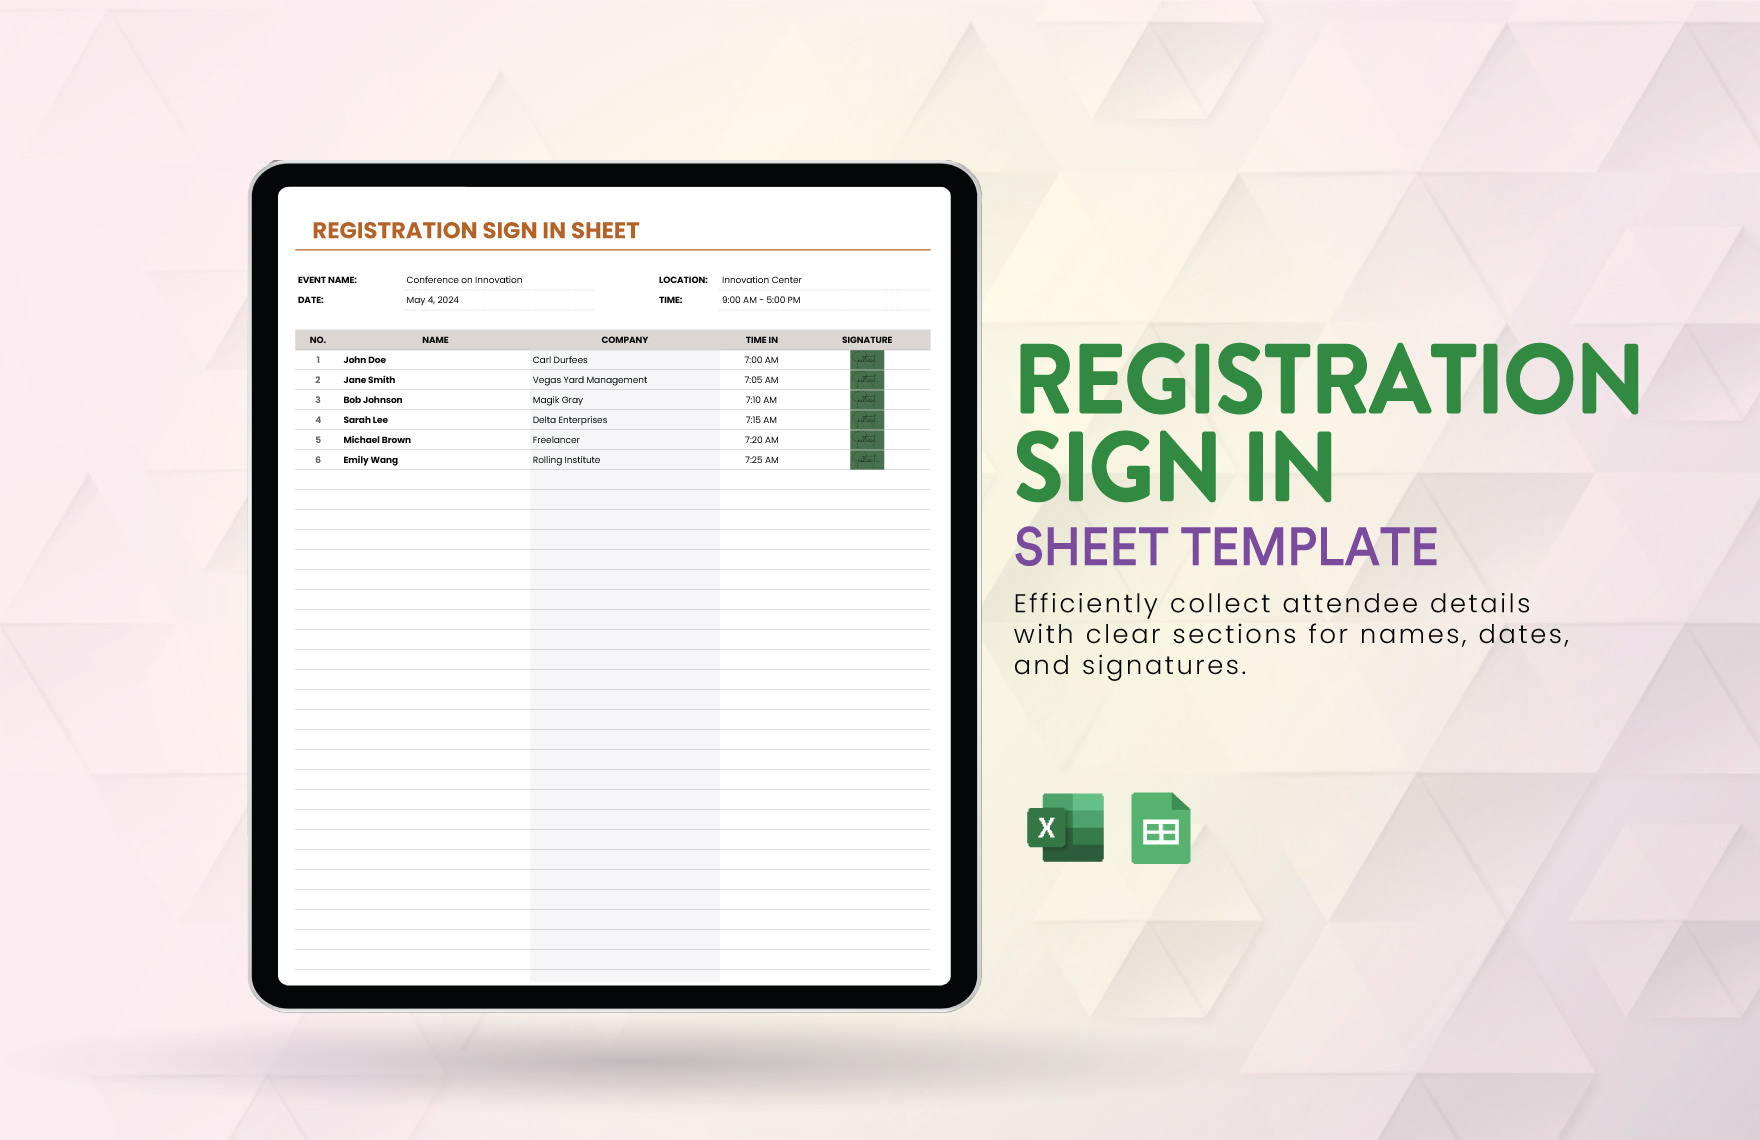 Registration Sign in Sheet Template in Excel, Google Sheets